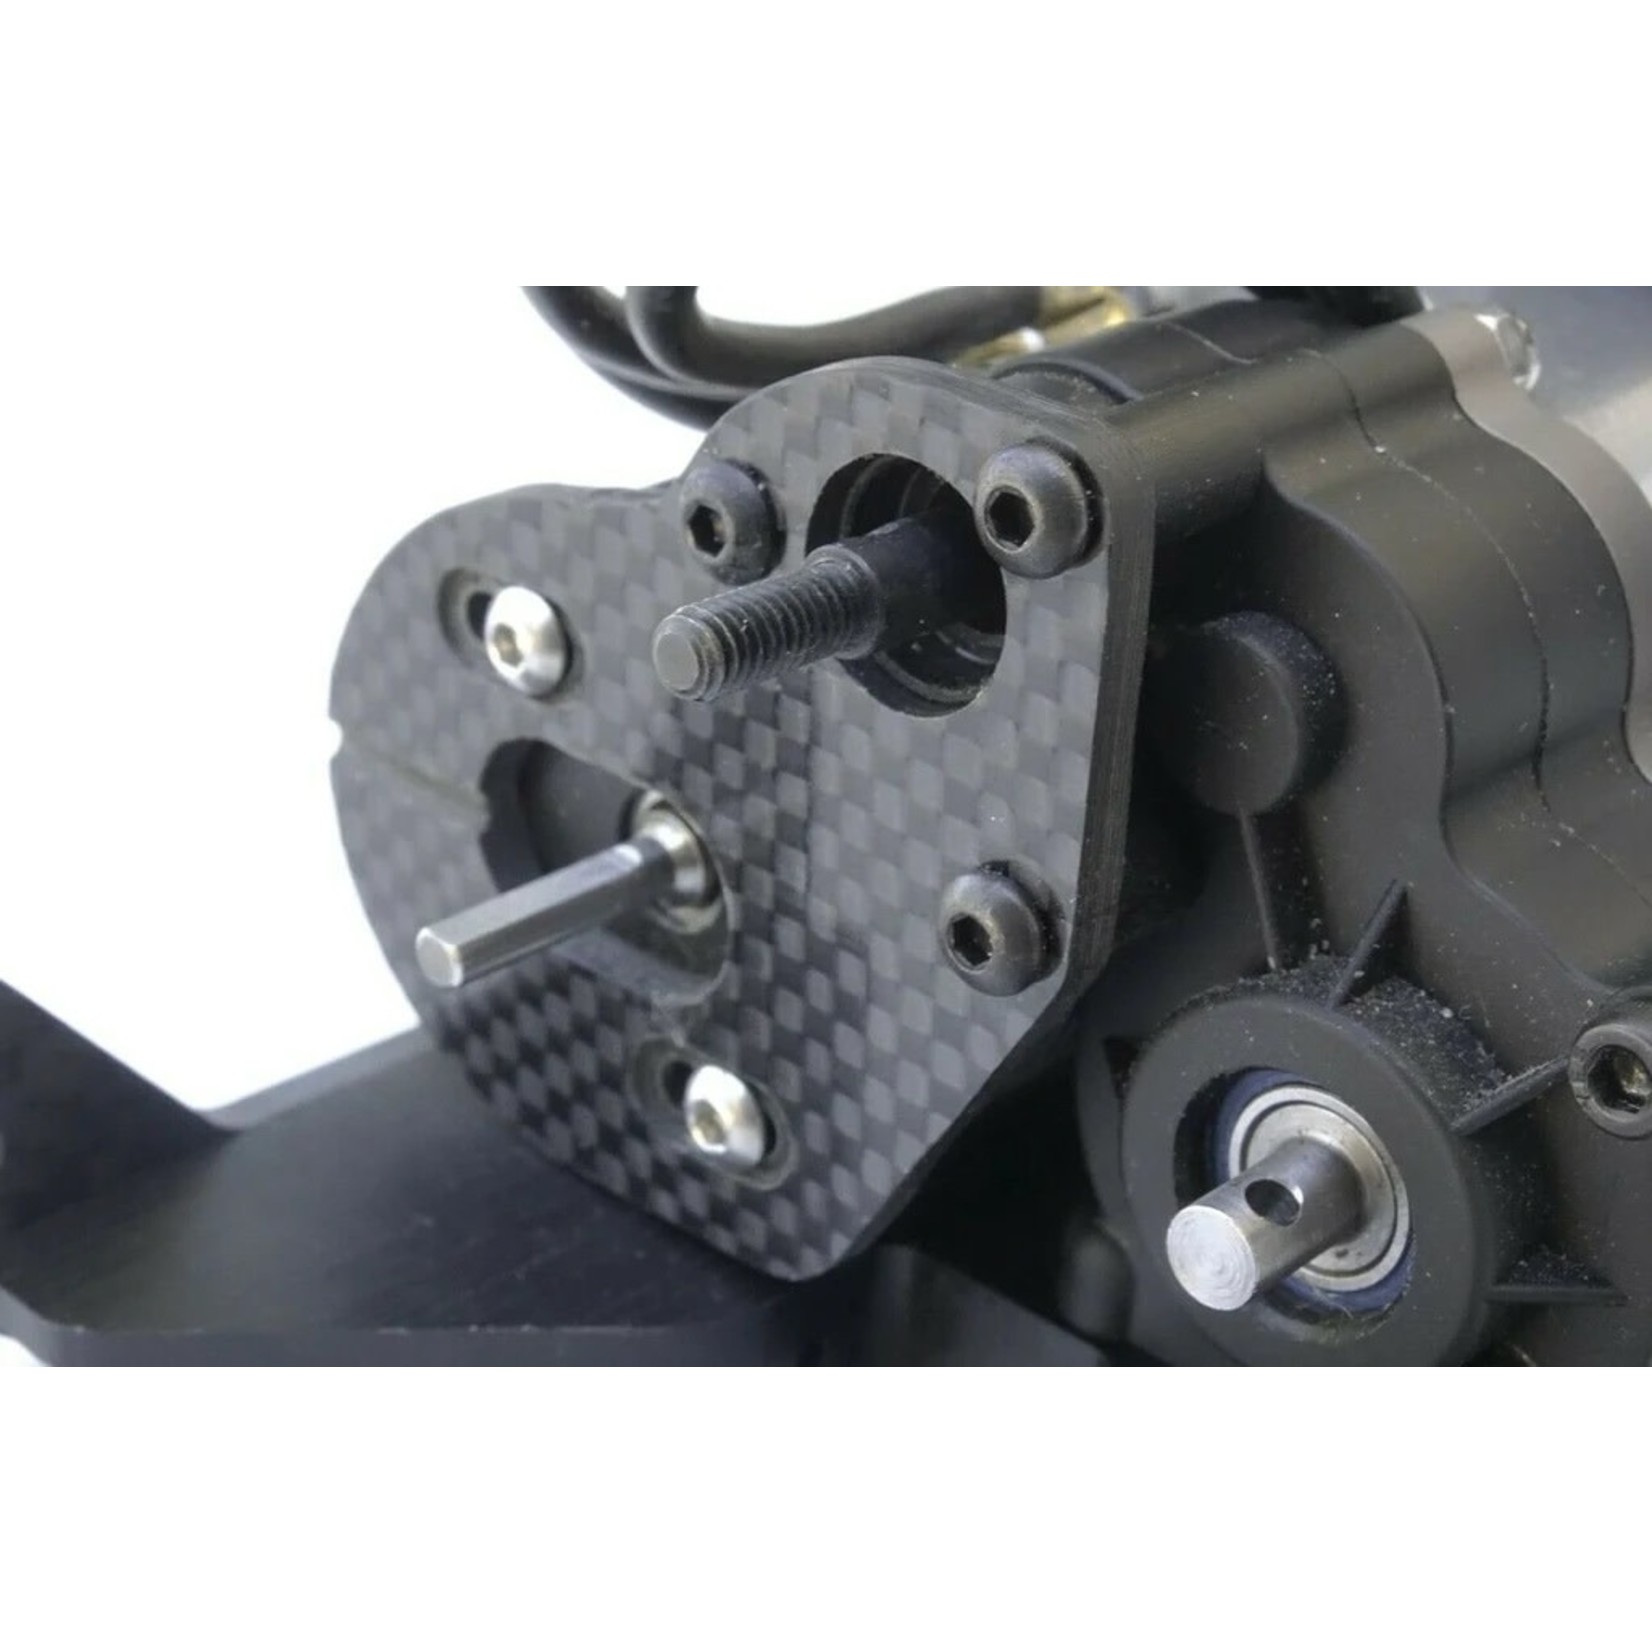 Tech Factory Racing Tech Factory Racing Carbon Fiber Motor Plate for Axial SCX10 Wraith 3-Gear Transmissions